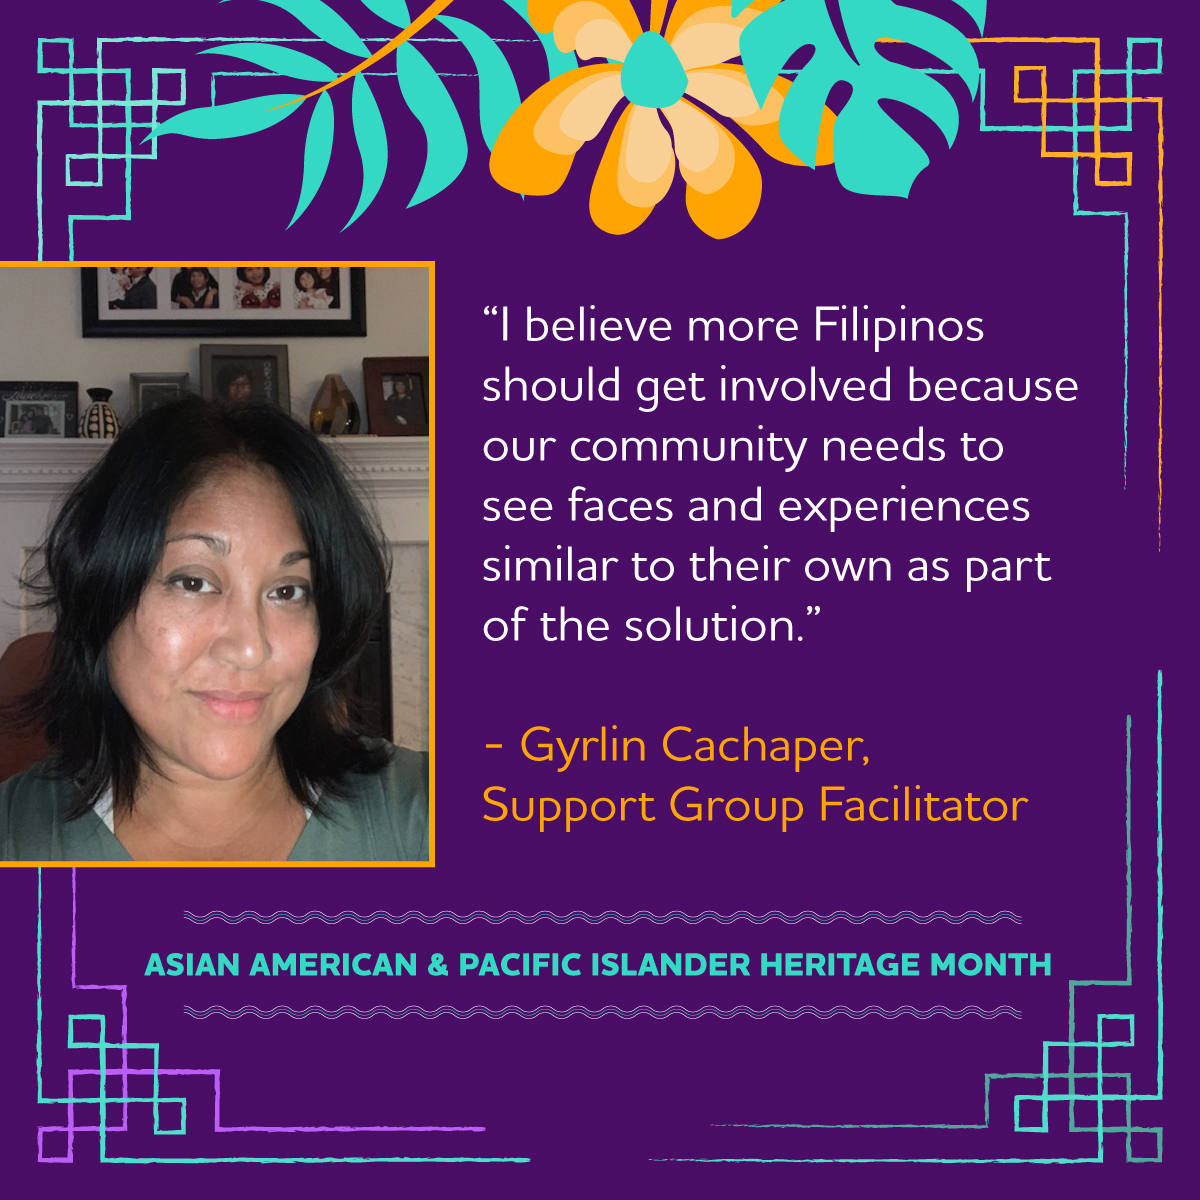 Hearing and seeing people in our own community talk about Alzheimer’s can be more meaningful and lead to greater engagement. Gyrlin connects with other Fillipinos as a support group facilitator, and she understands the value of representation. #AAPIMonth